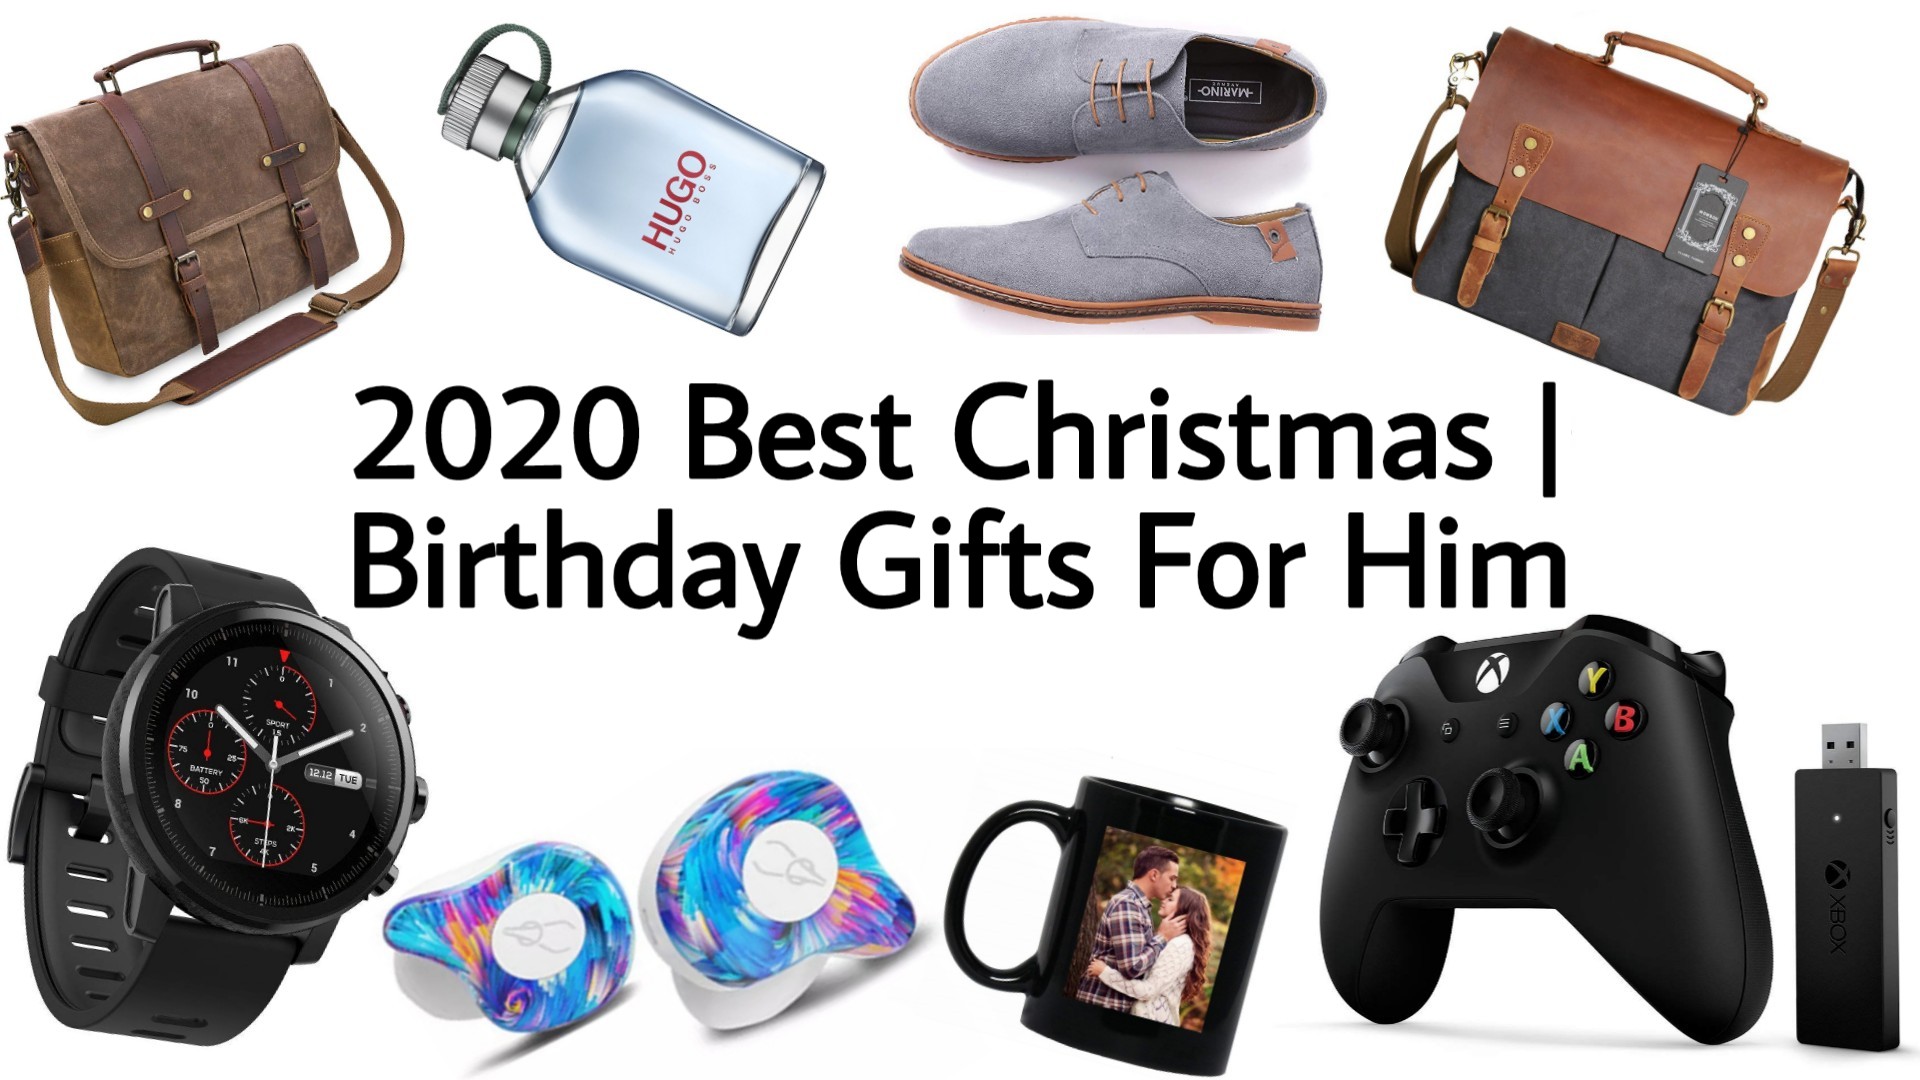 The Most Popular Christmas Gift Ideas In 2021 | Finder